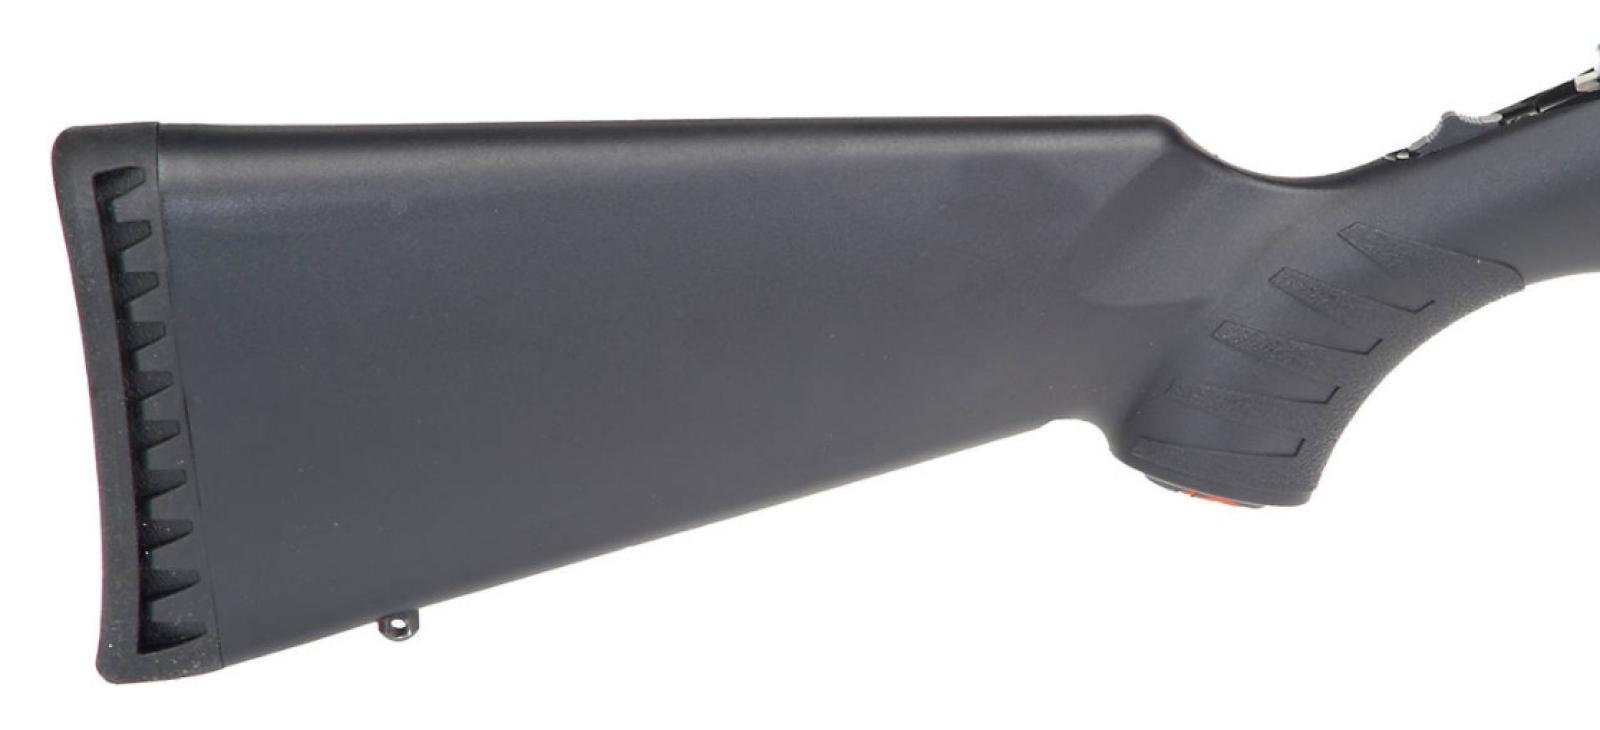 Ruger American Rifle Standard 30-06 Springfield Bolt-Action Rifle